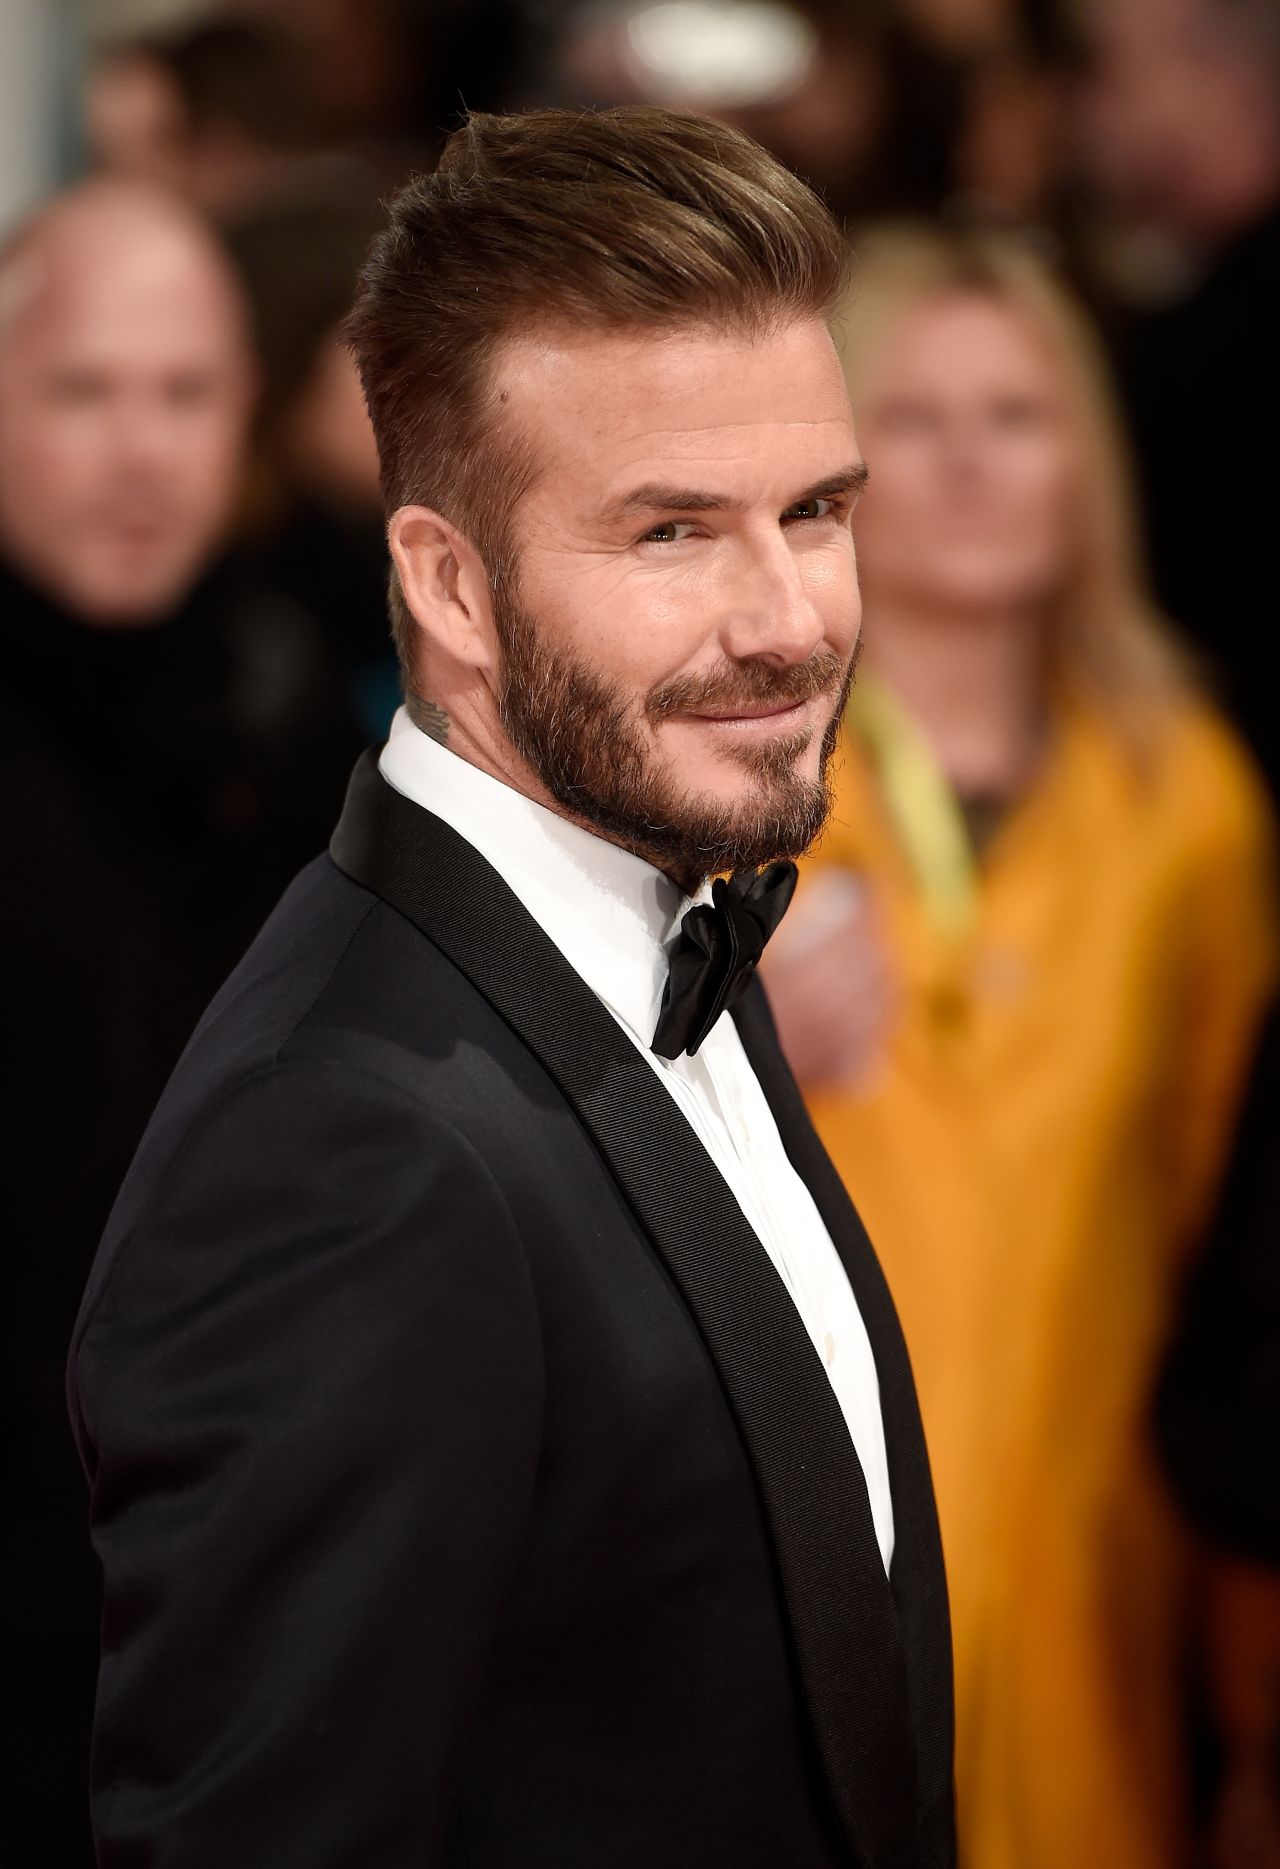 David Beckham has successfully cashed in on his commercial appeal. The former England captain reportedly earns more in retirement than he did during his playing career.